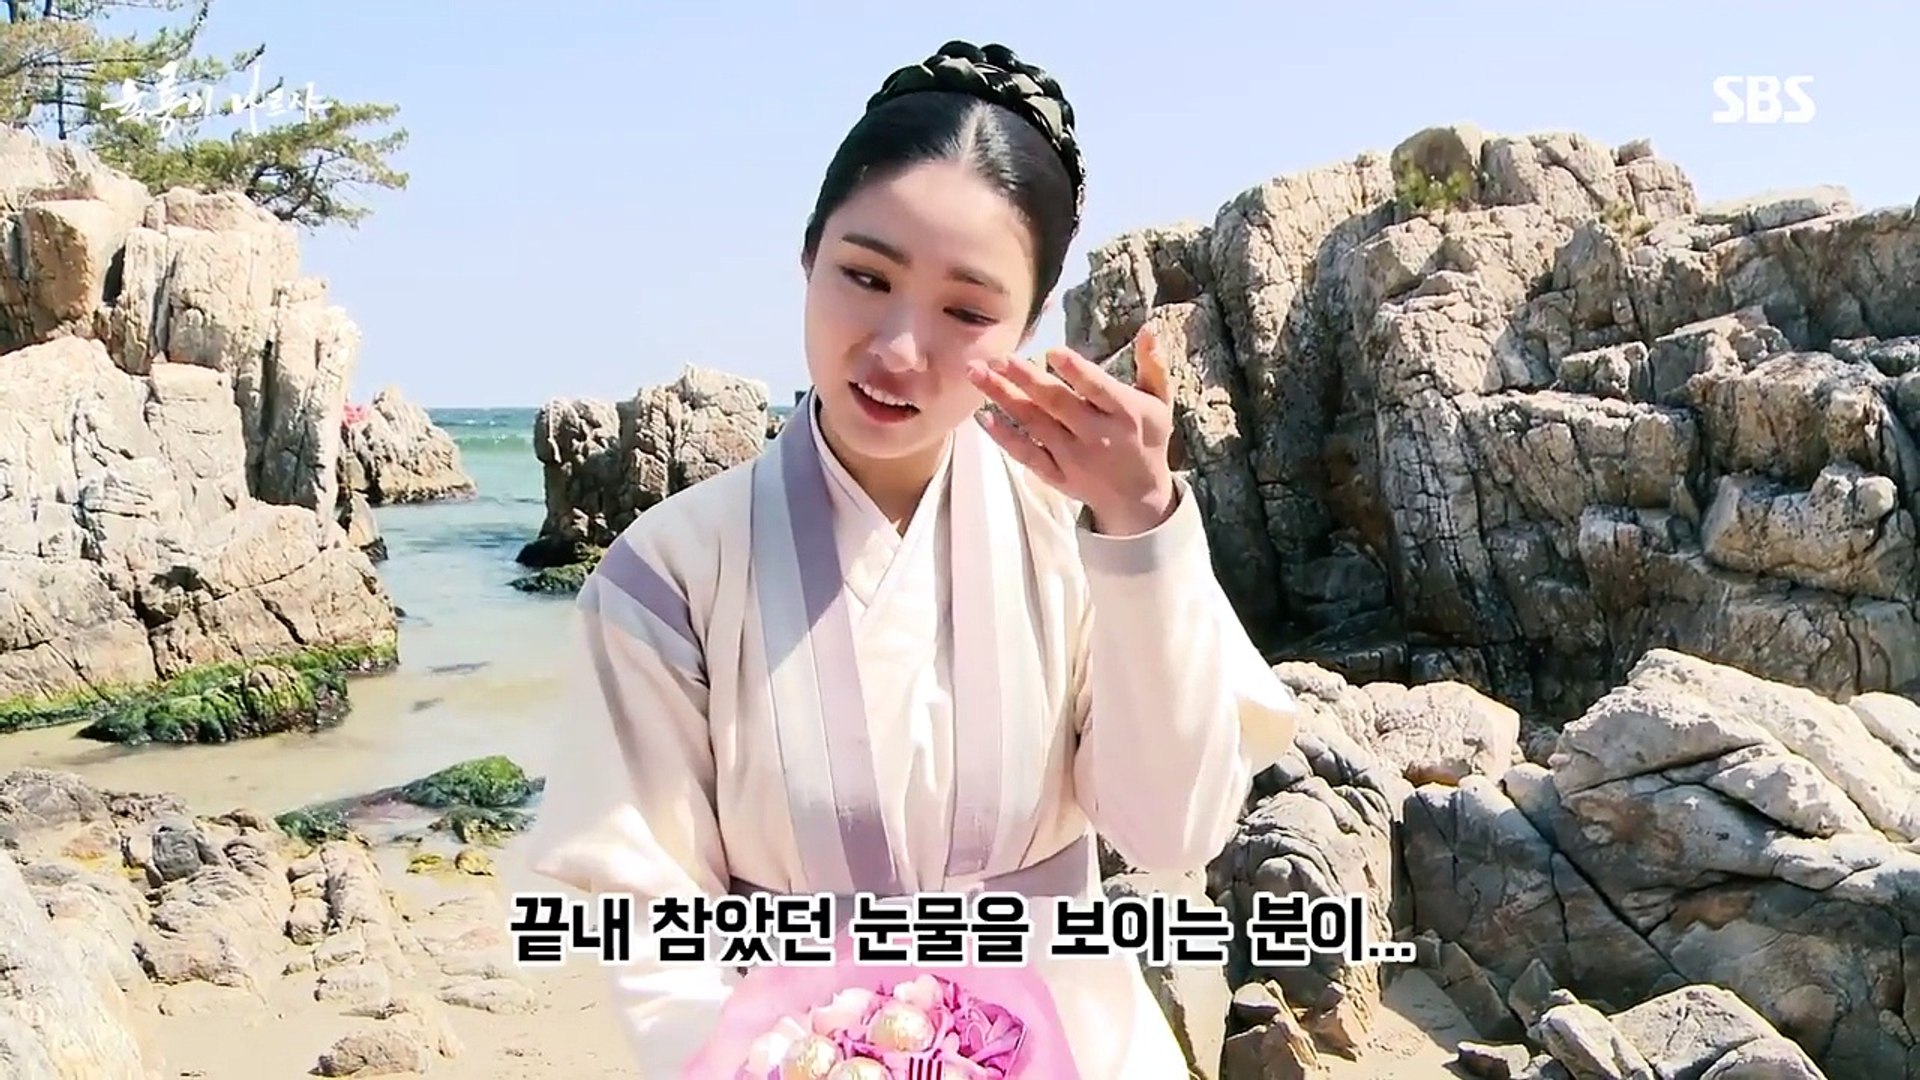 Six Flying Dragons - Behind the Scenes - Yoo Ah In, Shin Se Kyung - Final  Filming - Dailymotion Video